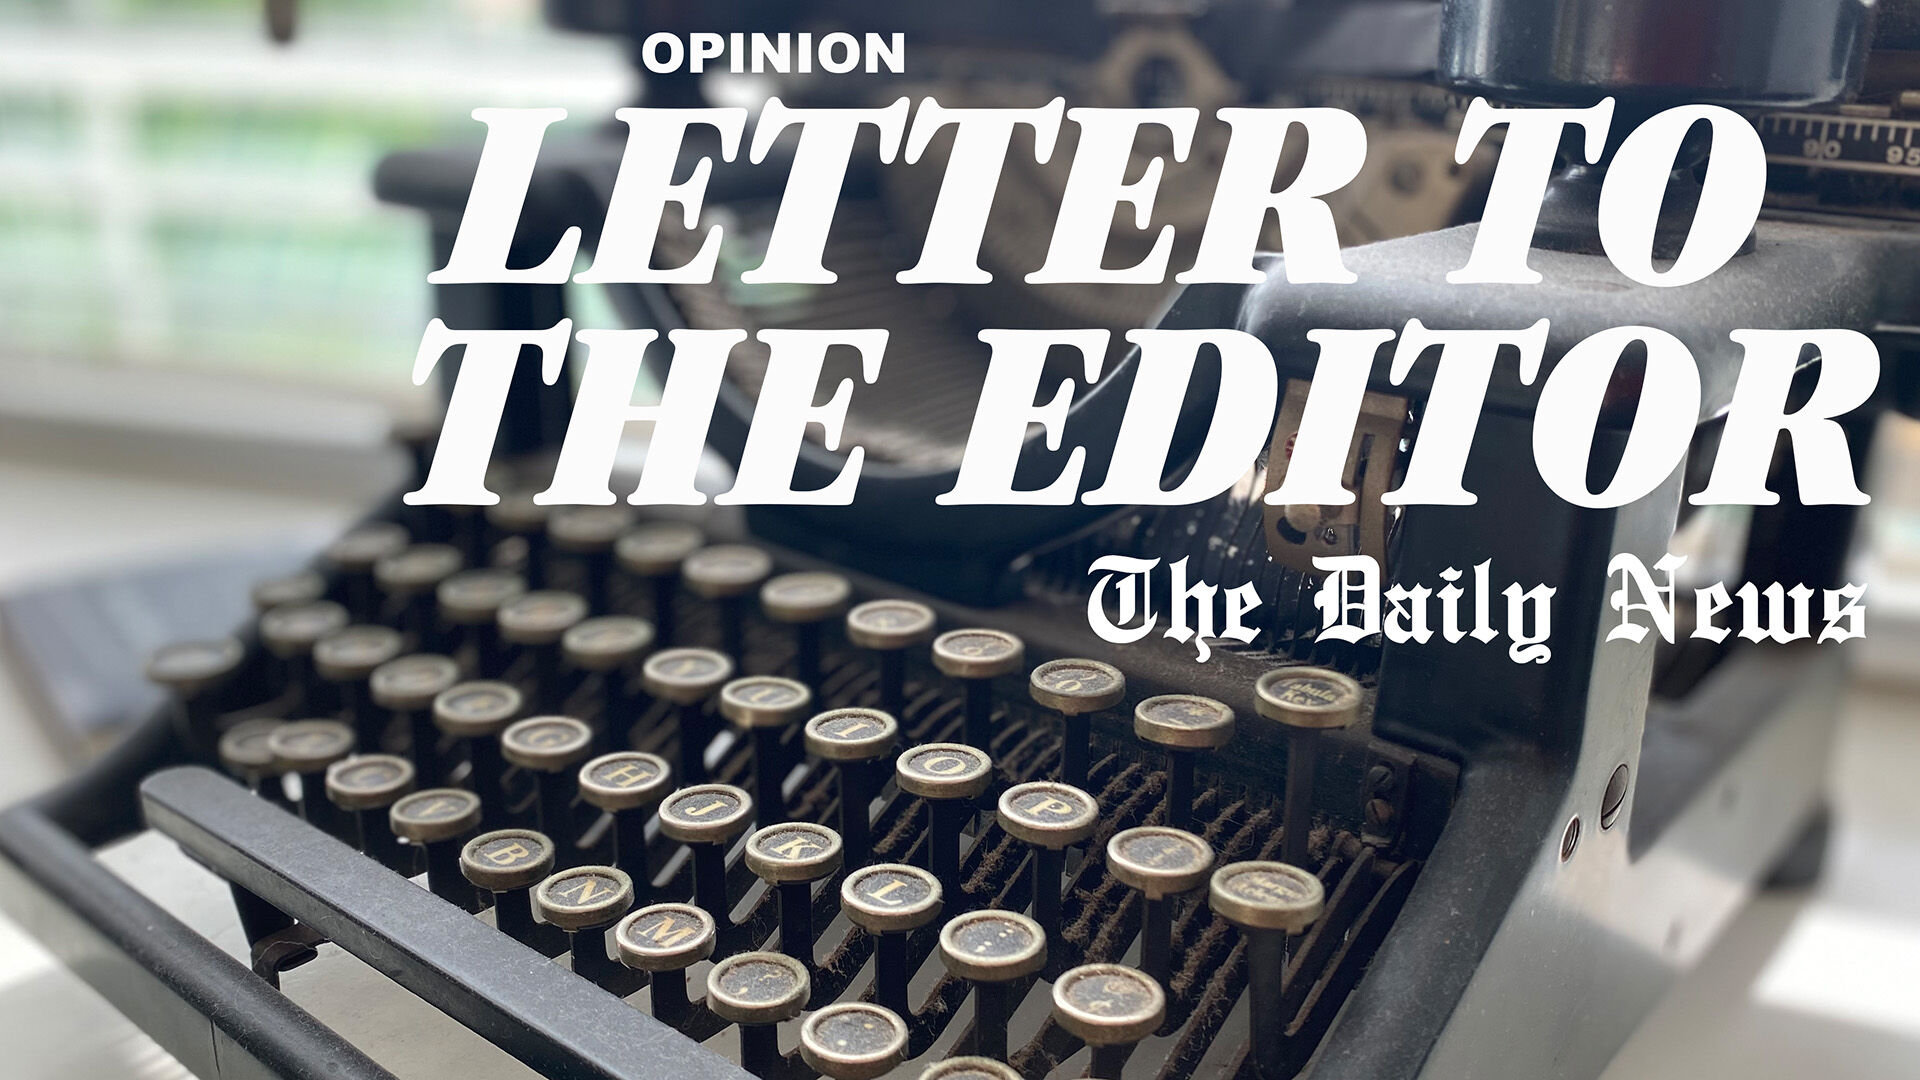 Texas City's landscaping ordinance is dangerous | Letters to the Editor